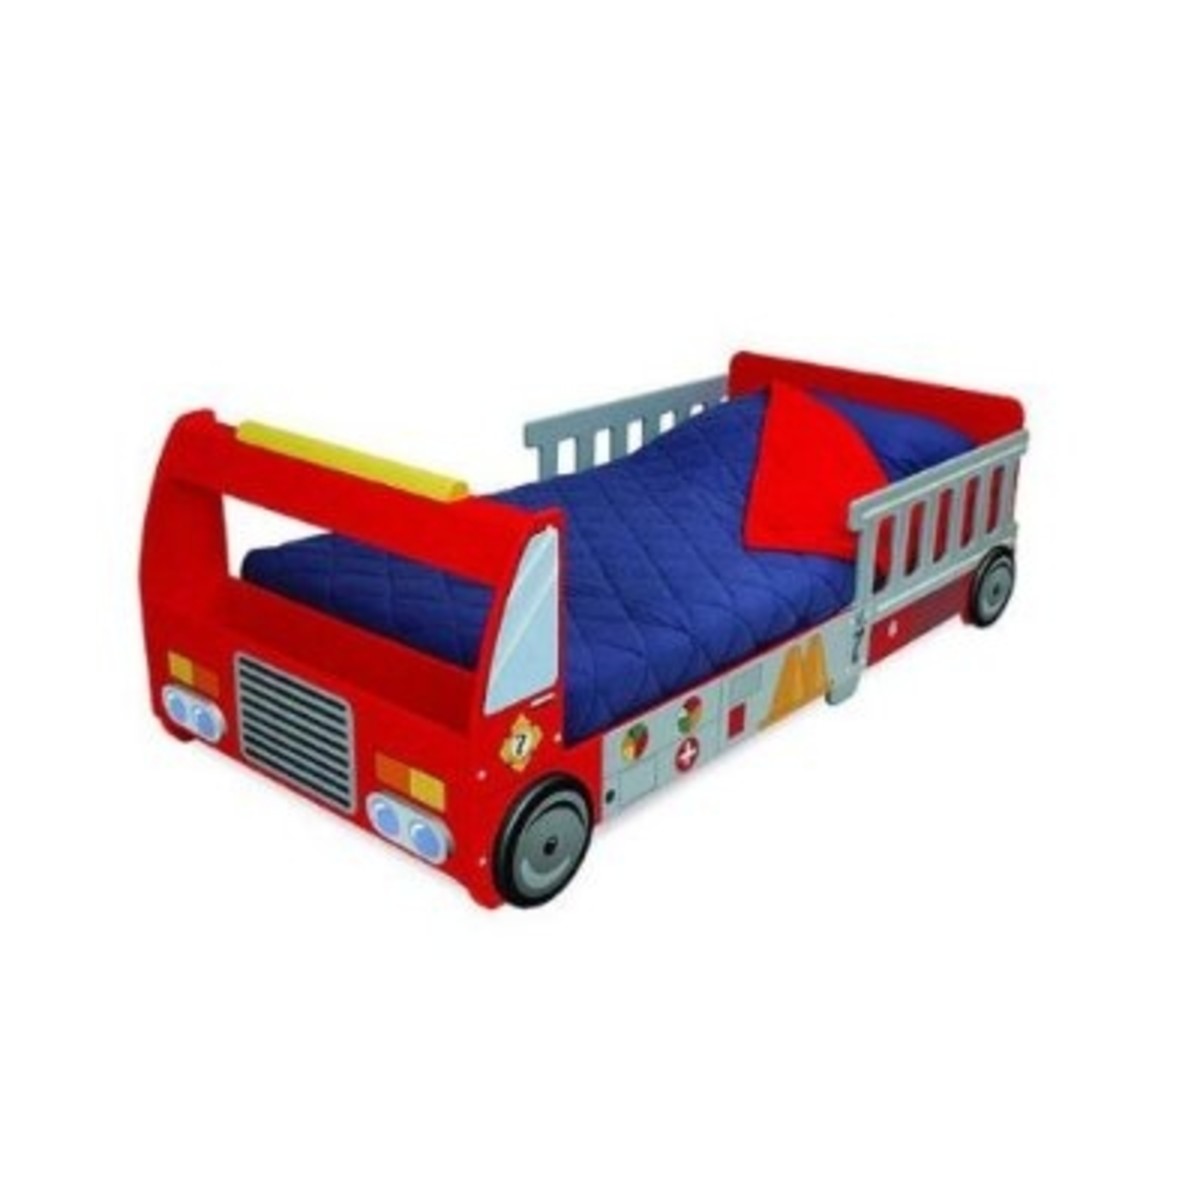 KidKraft Fire Truck Toddler Cot Bed - suitable for children 24 months to 6 years.